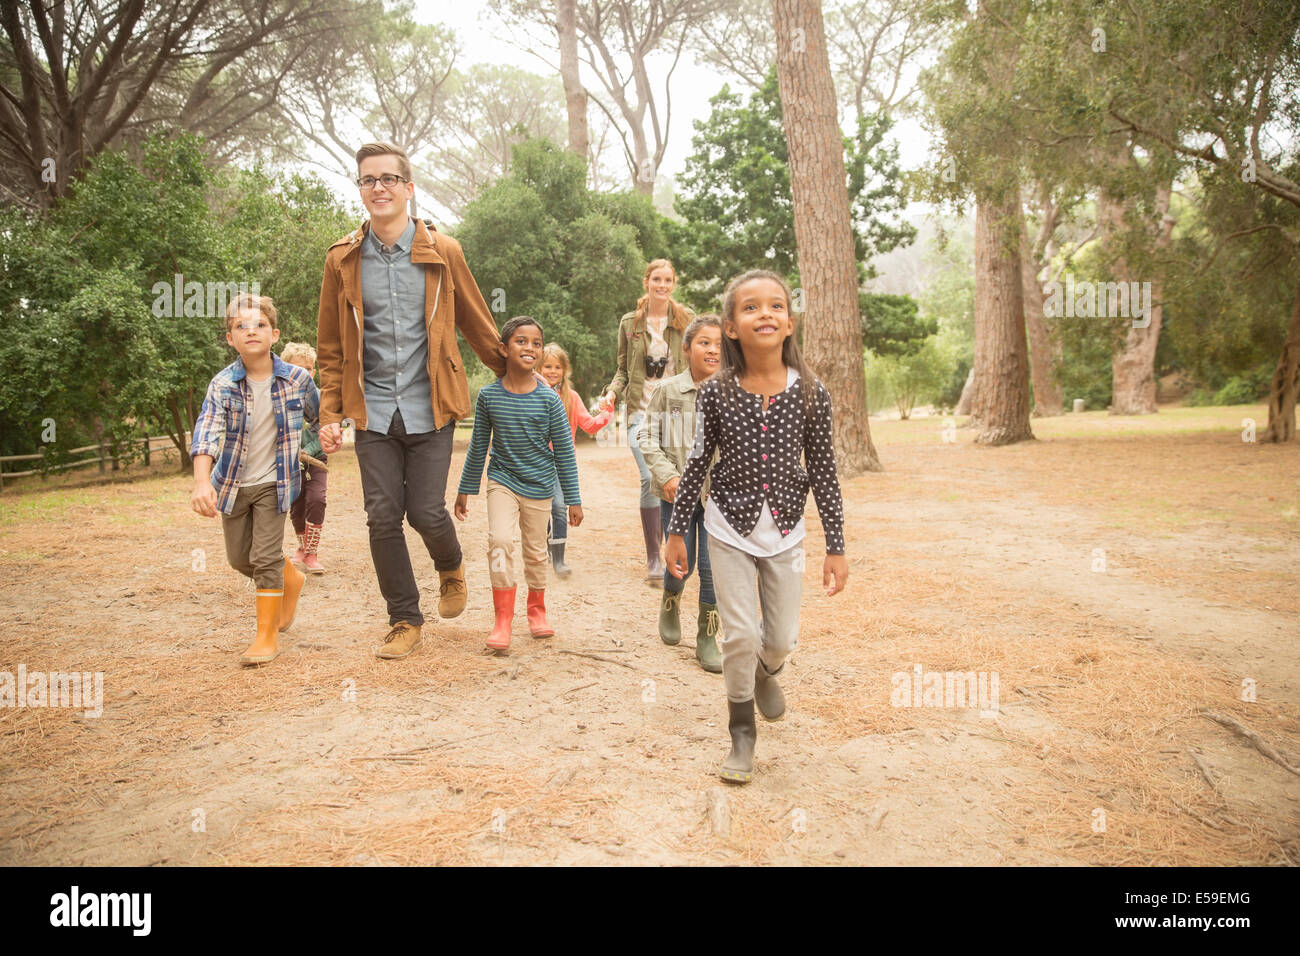 Students and teachers walking outdoors Stock Photo